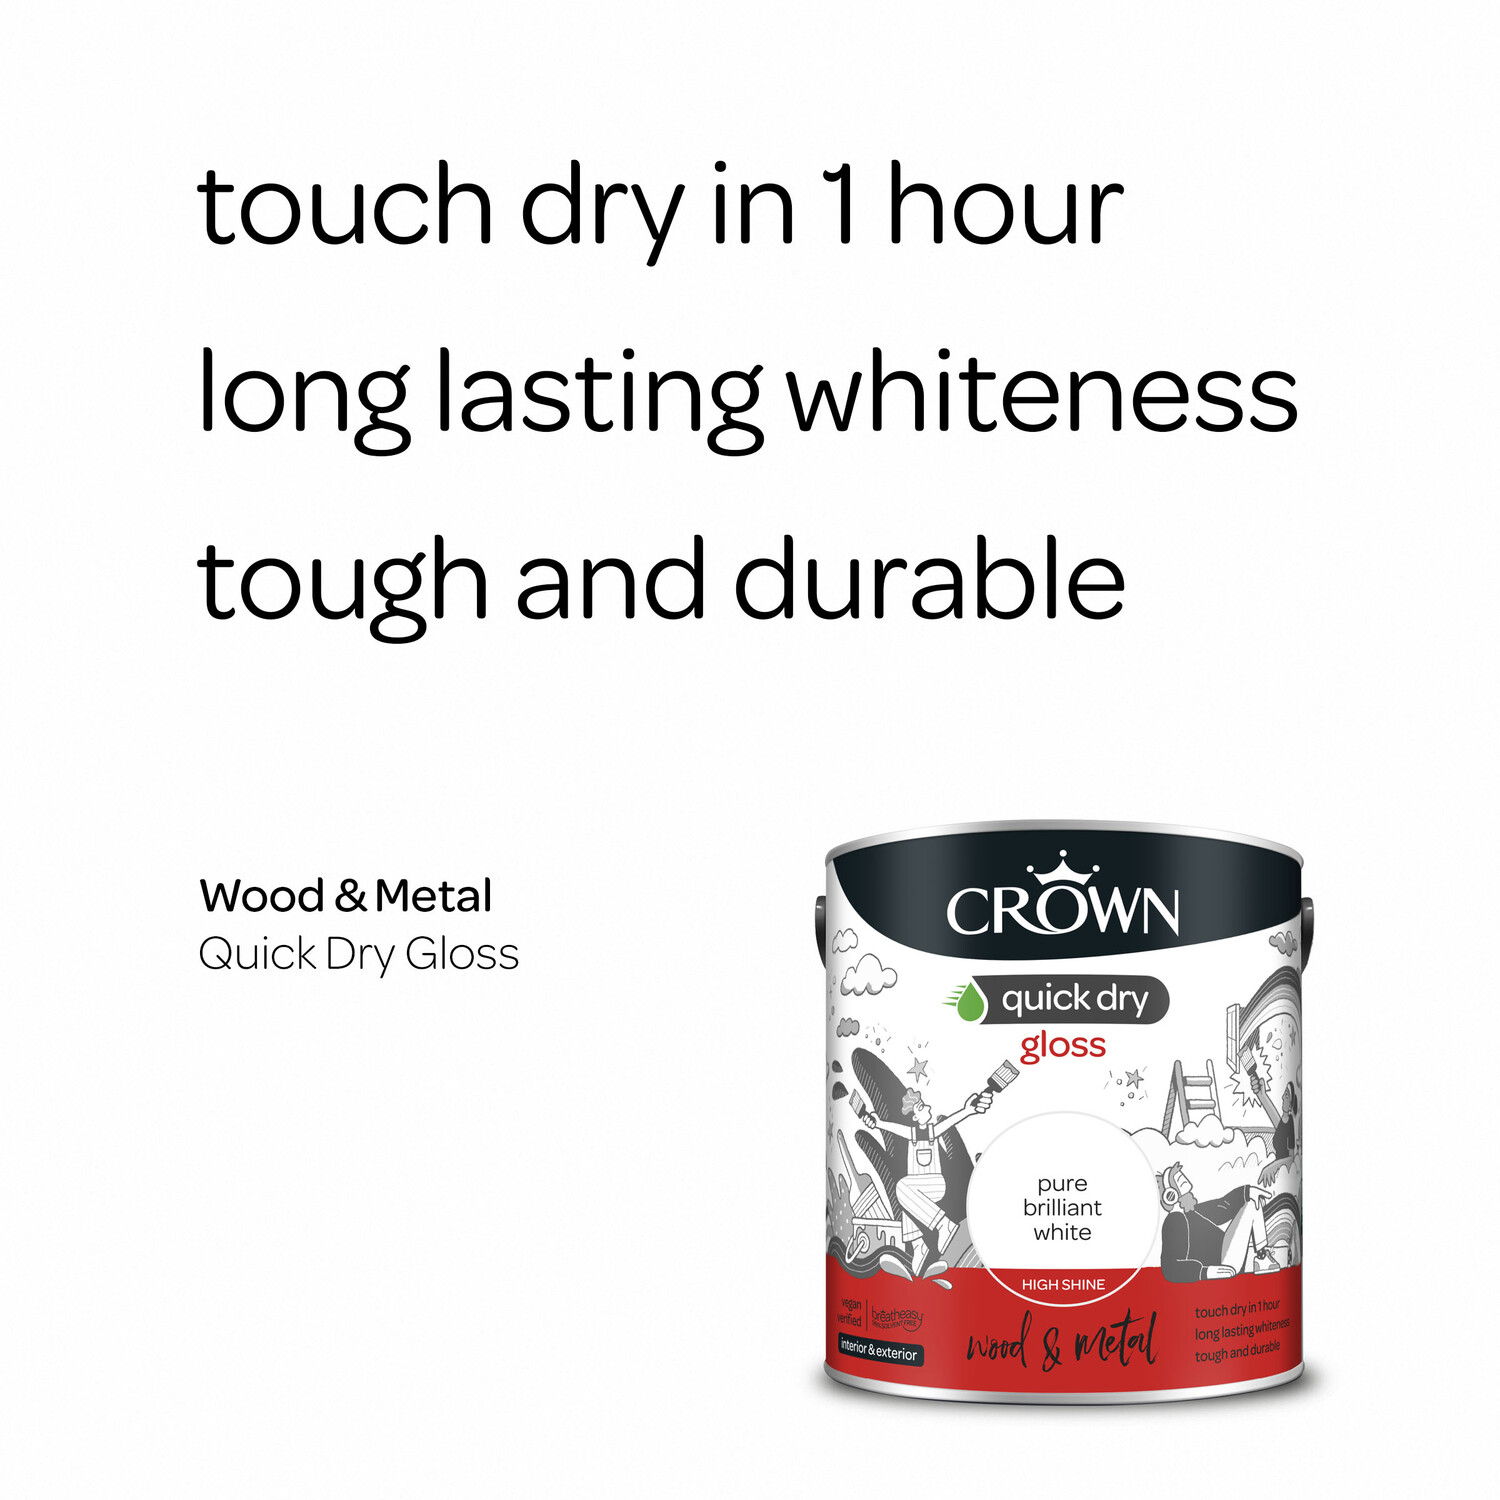 Crown Quick Dry Wood and Metal Pure Brilliant White Gloss Paint 2.5L Image 4